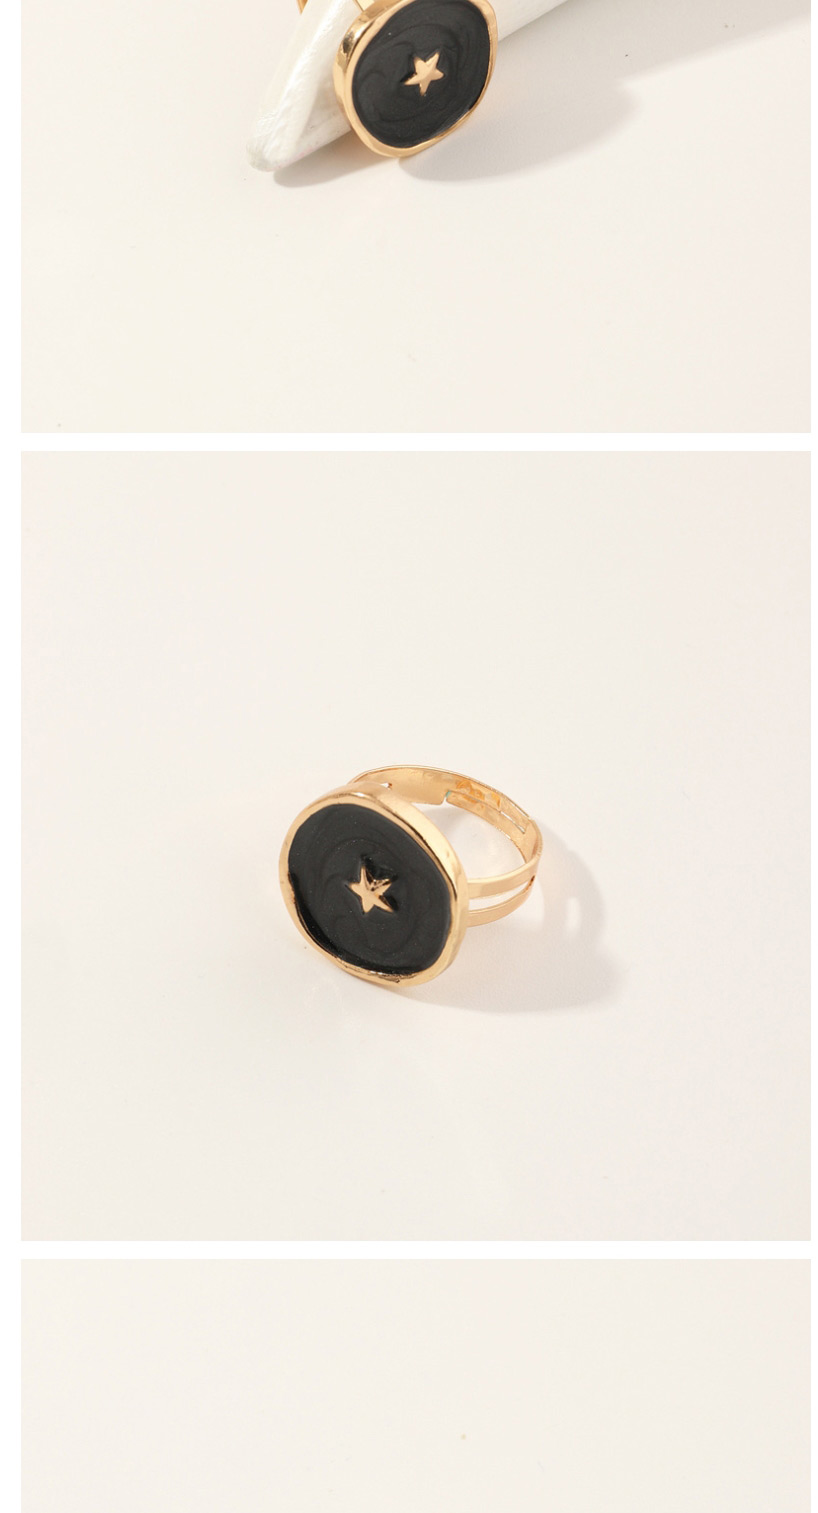 Fashion gold color+black star shape decorated ring,Fashion Rings